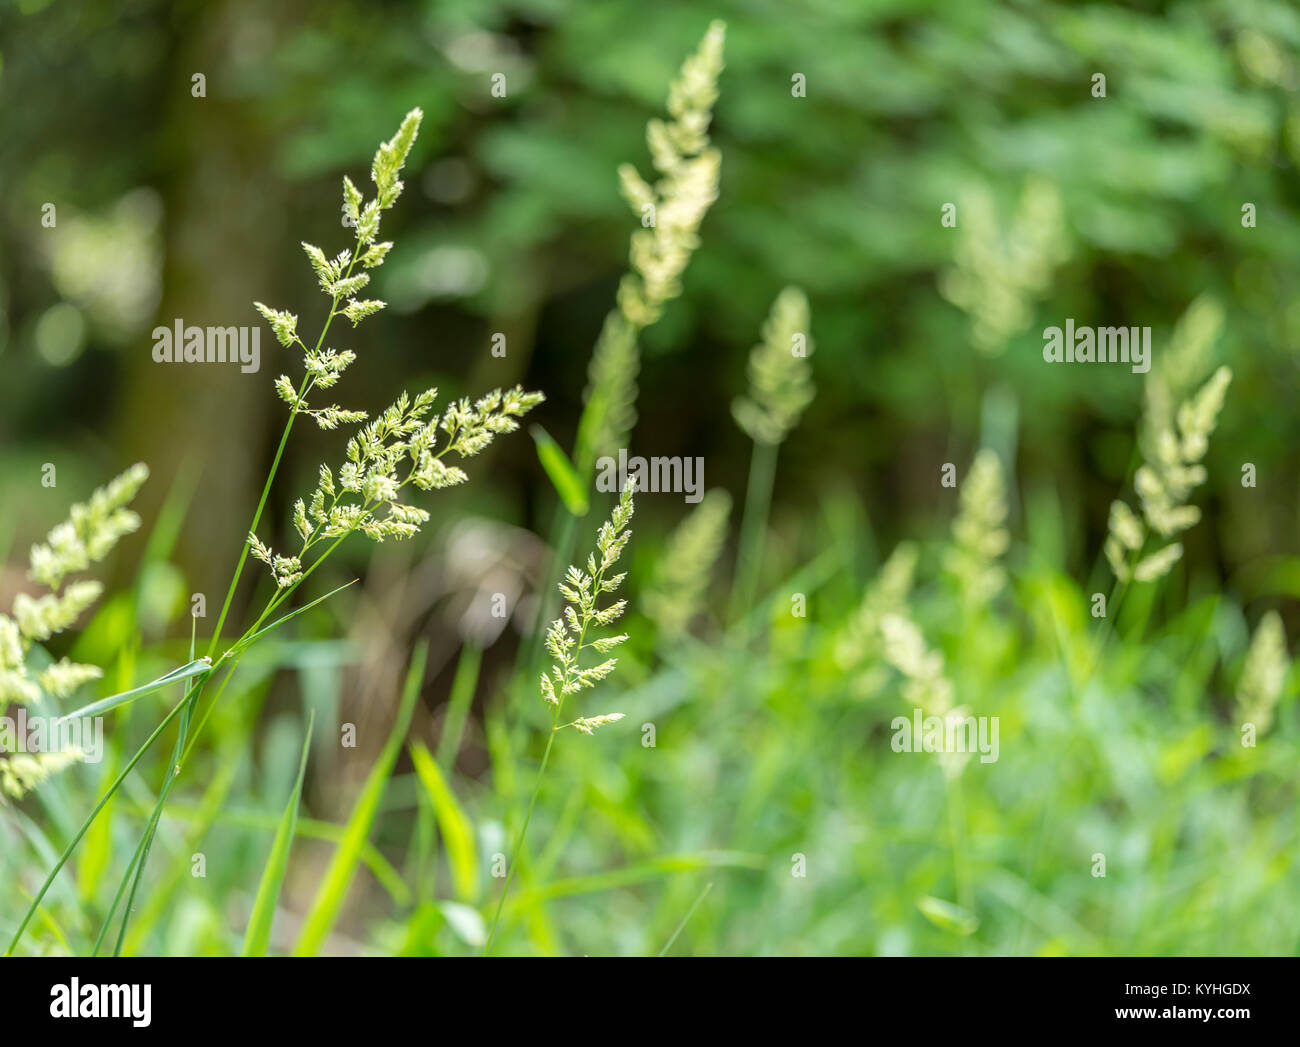 outdoor scenery including some grass spikes Stock Photo